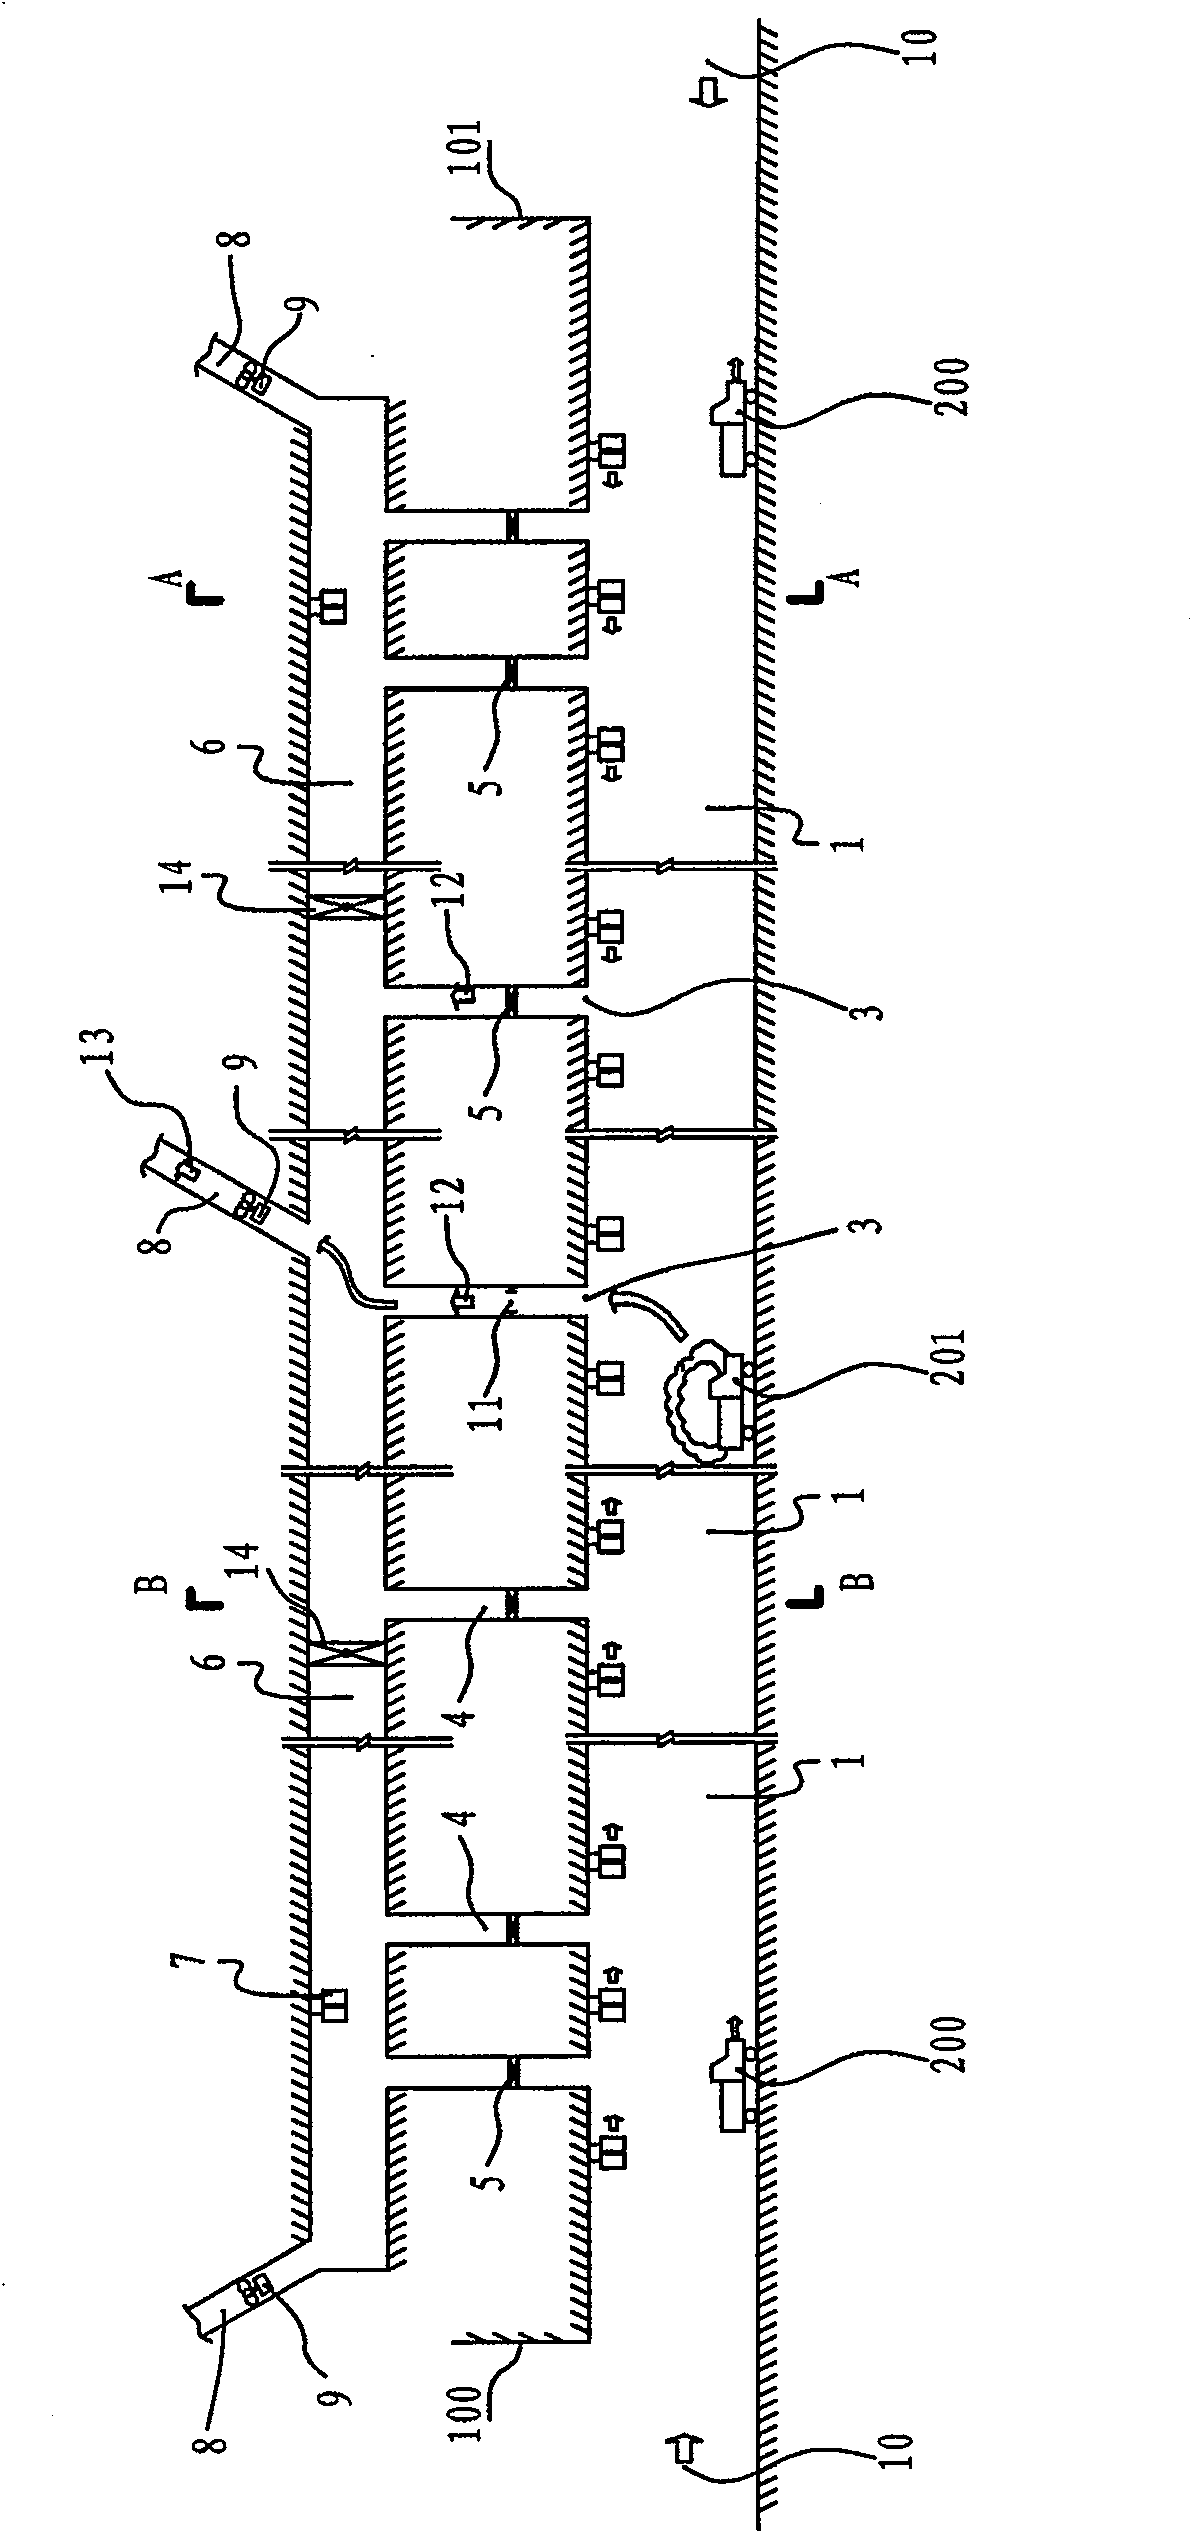 Improved tunnel smoke discharging method and tunnel fume discharging system with independent fume discharging device